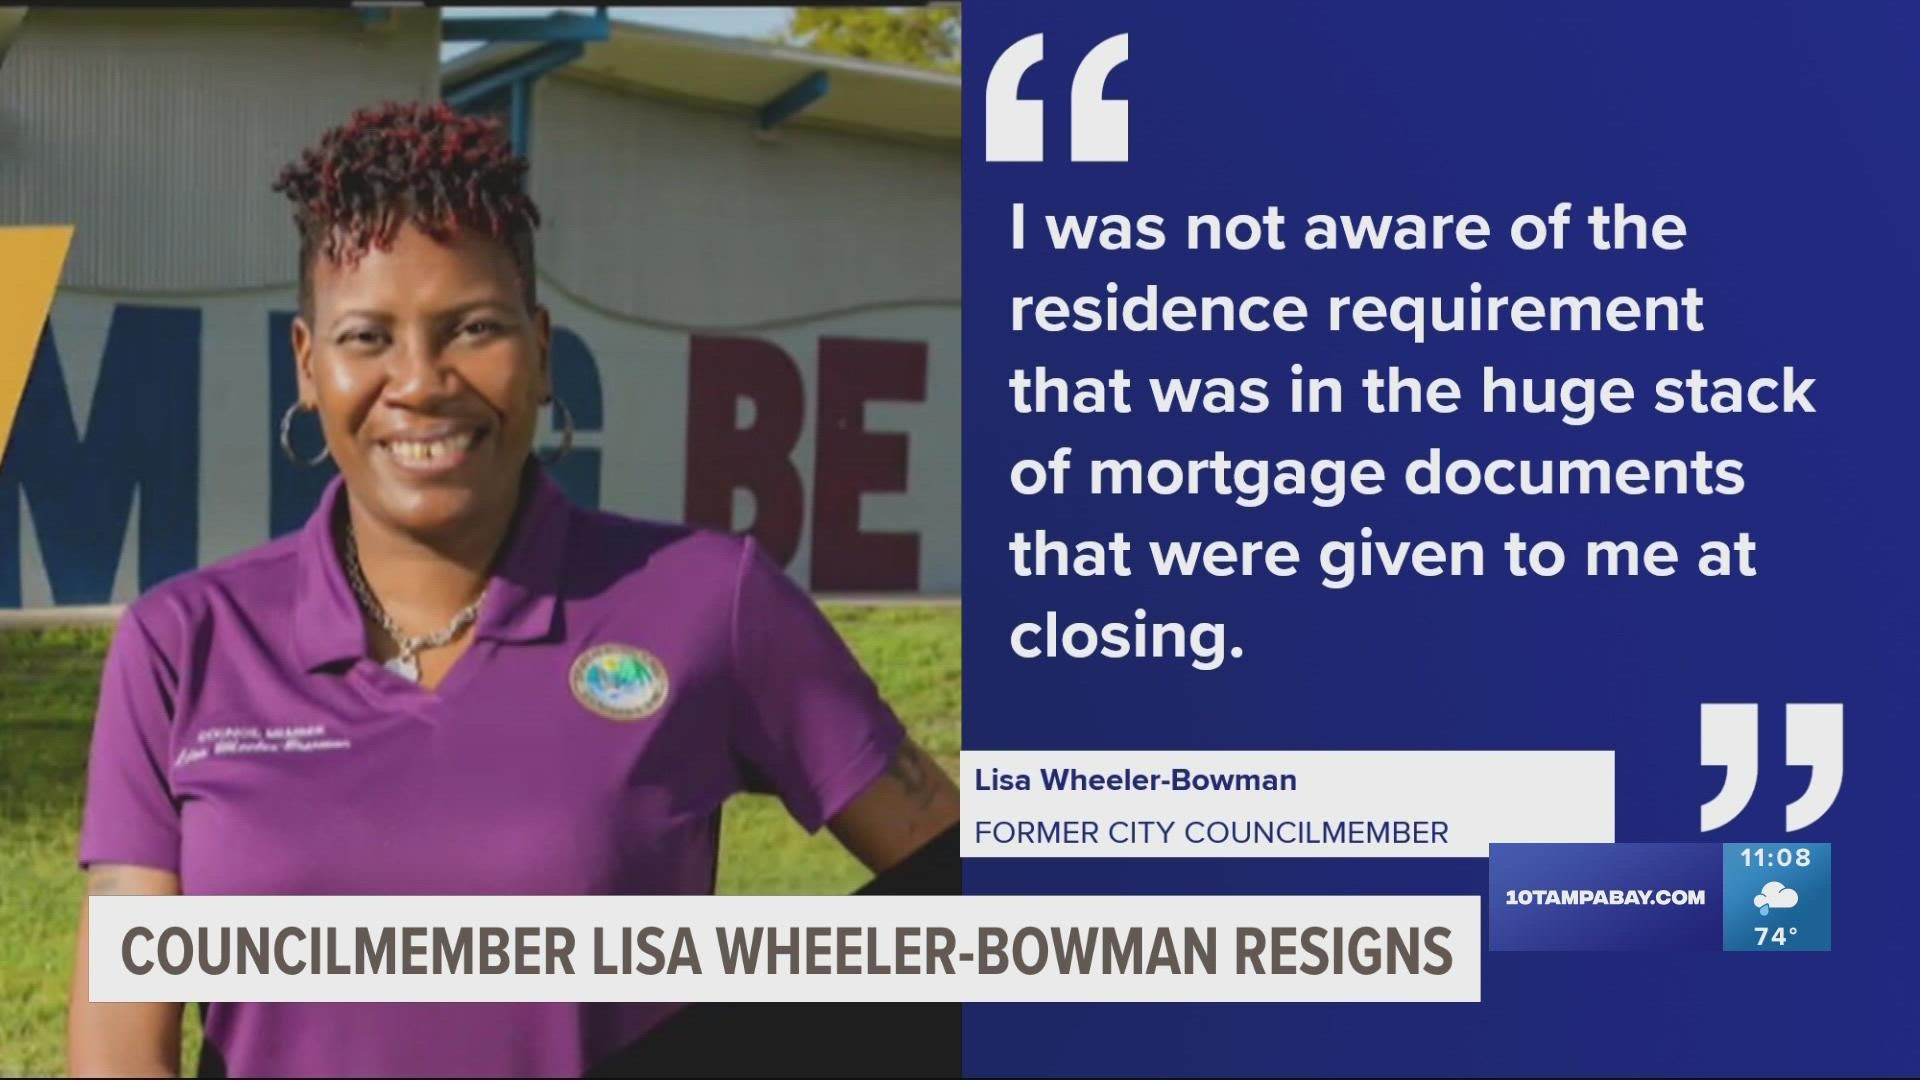 Lisa Wheeler-Bowman was accused of living in a house in District 6 while she was representing District 7.